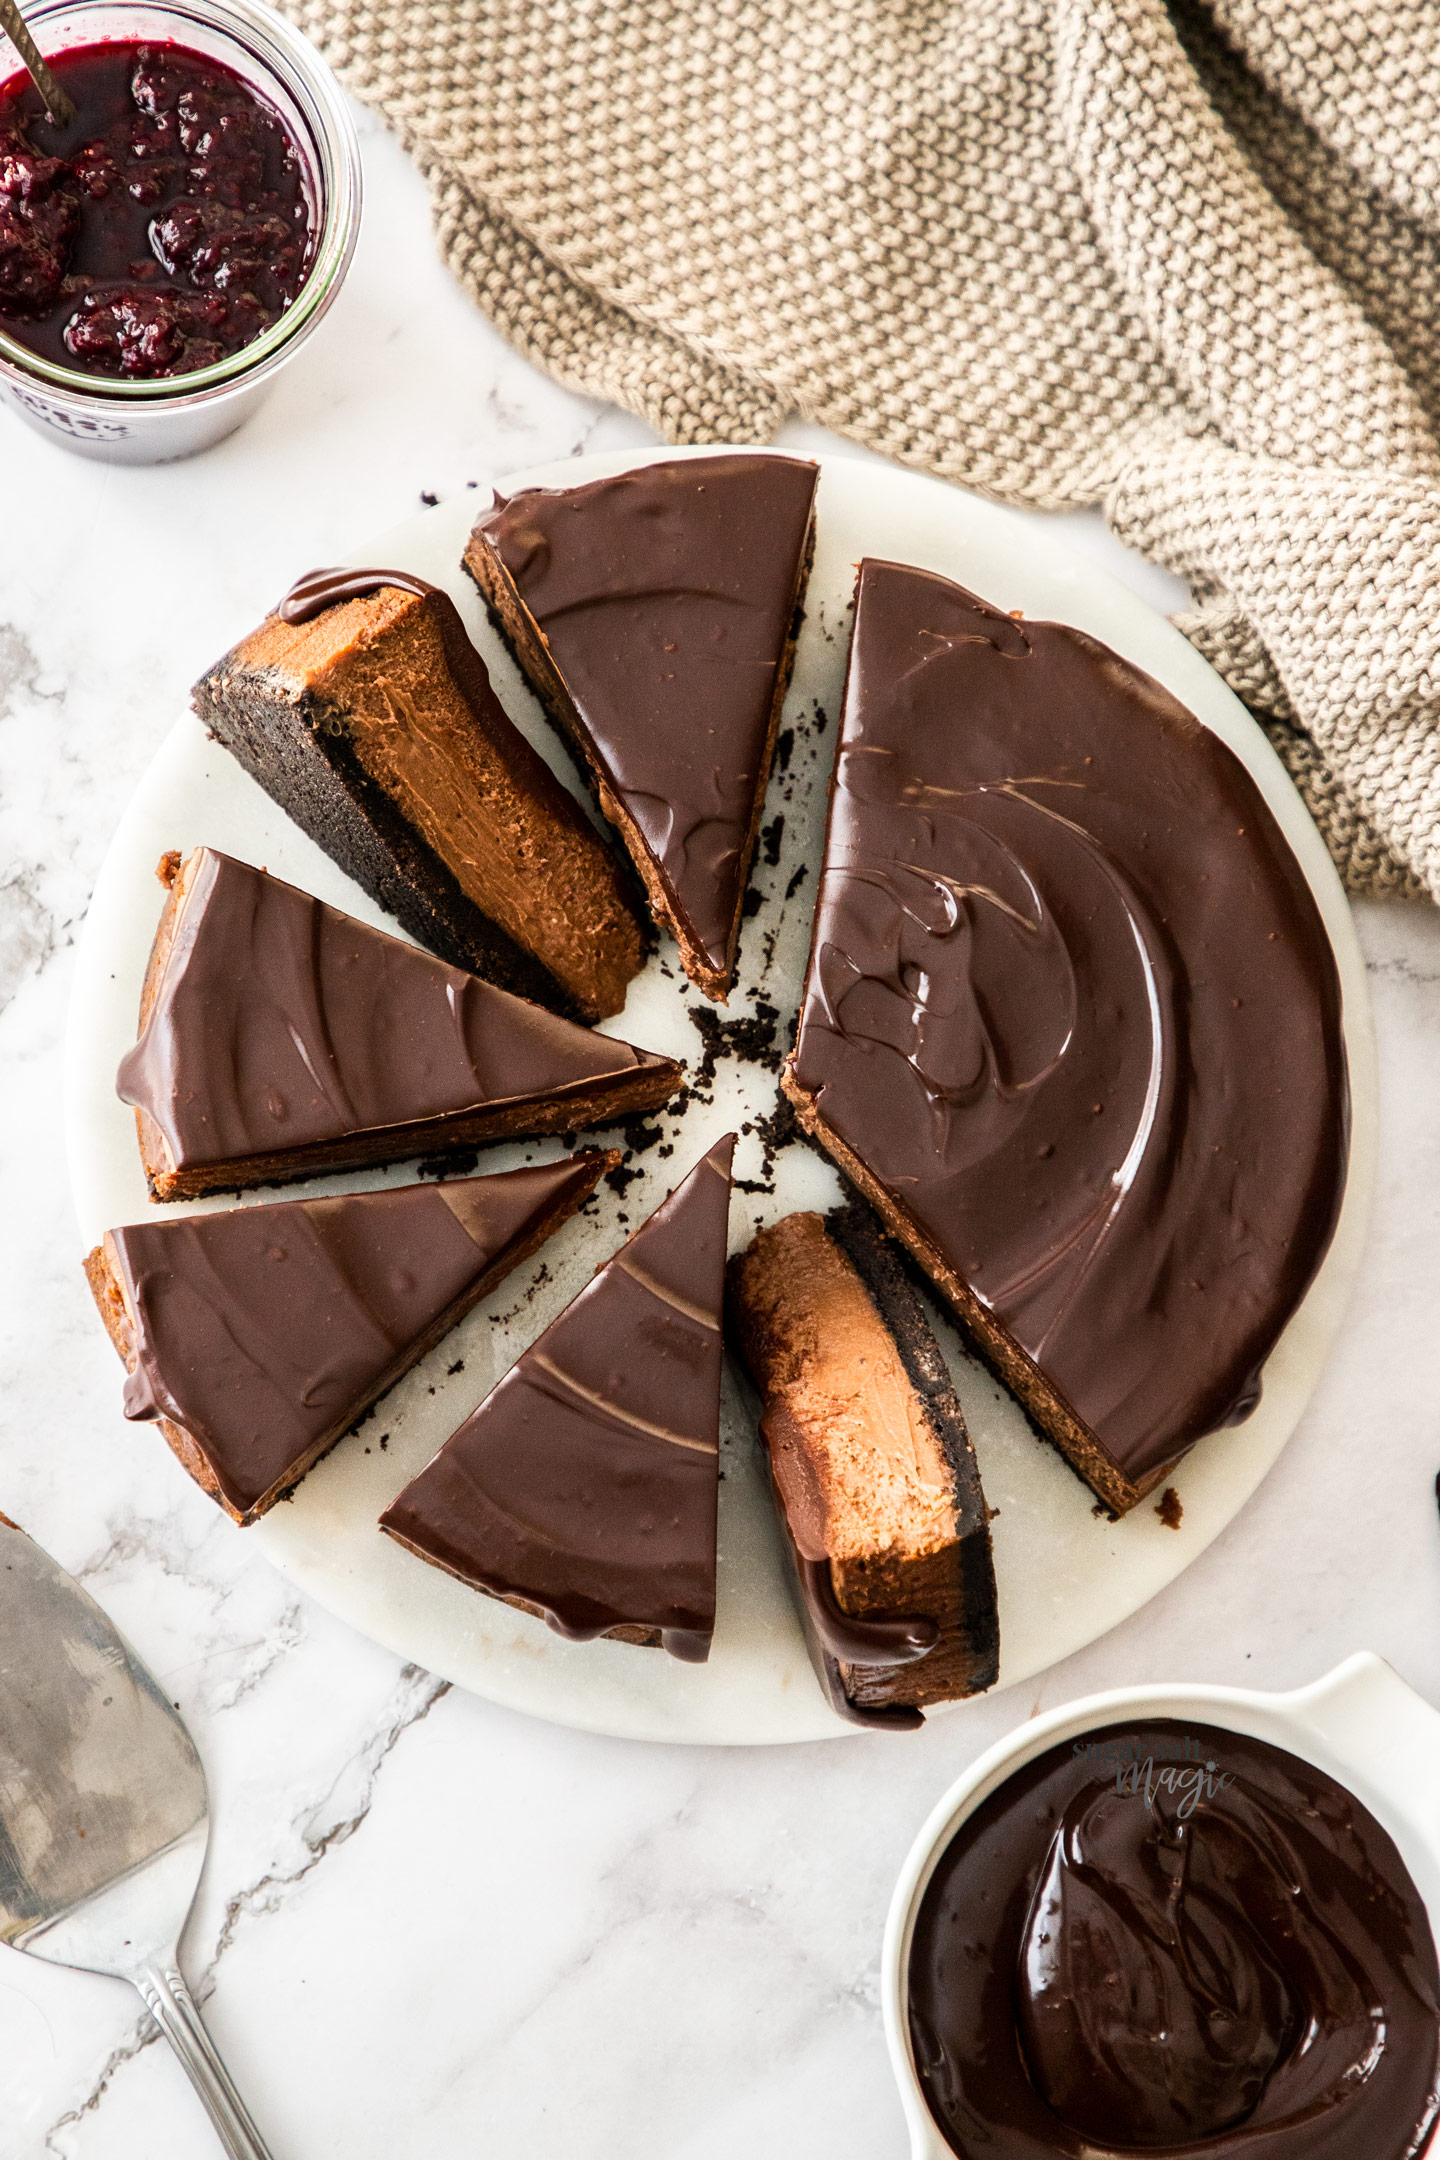 Top down view of a chocolate cheesecake cut into slices.